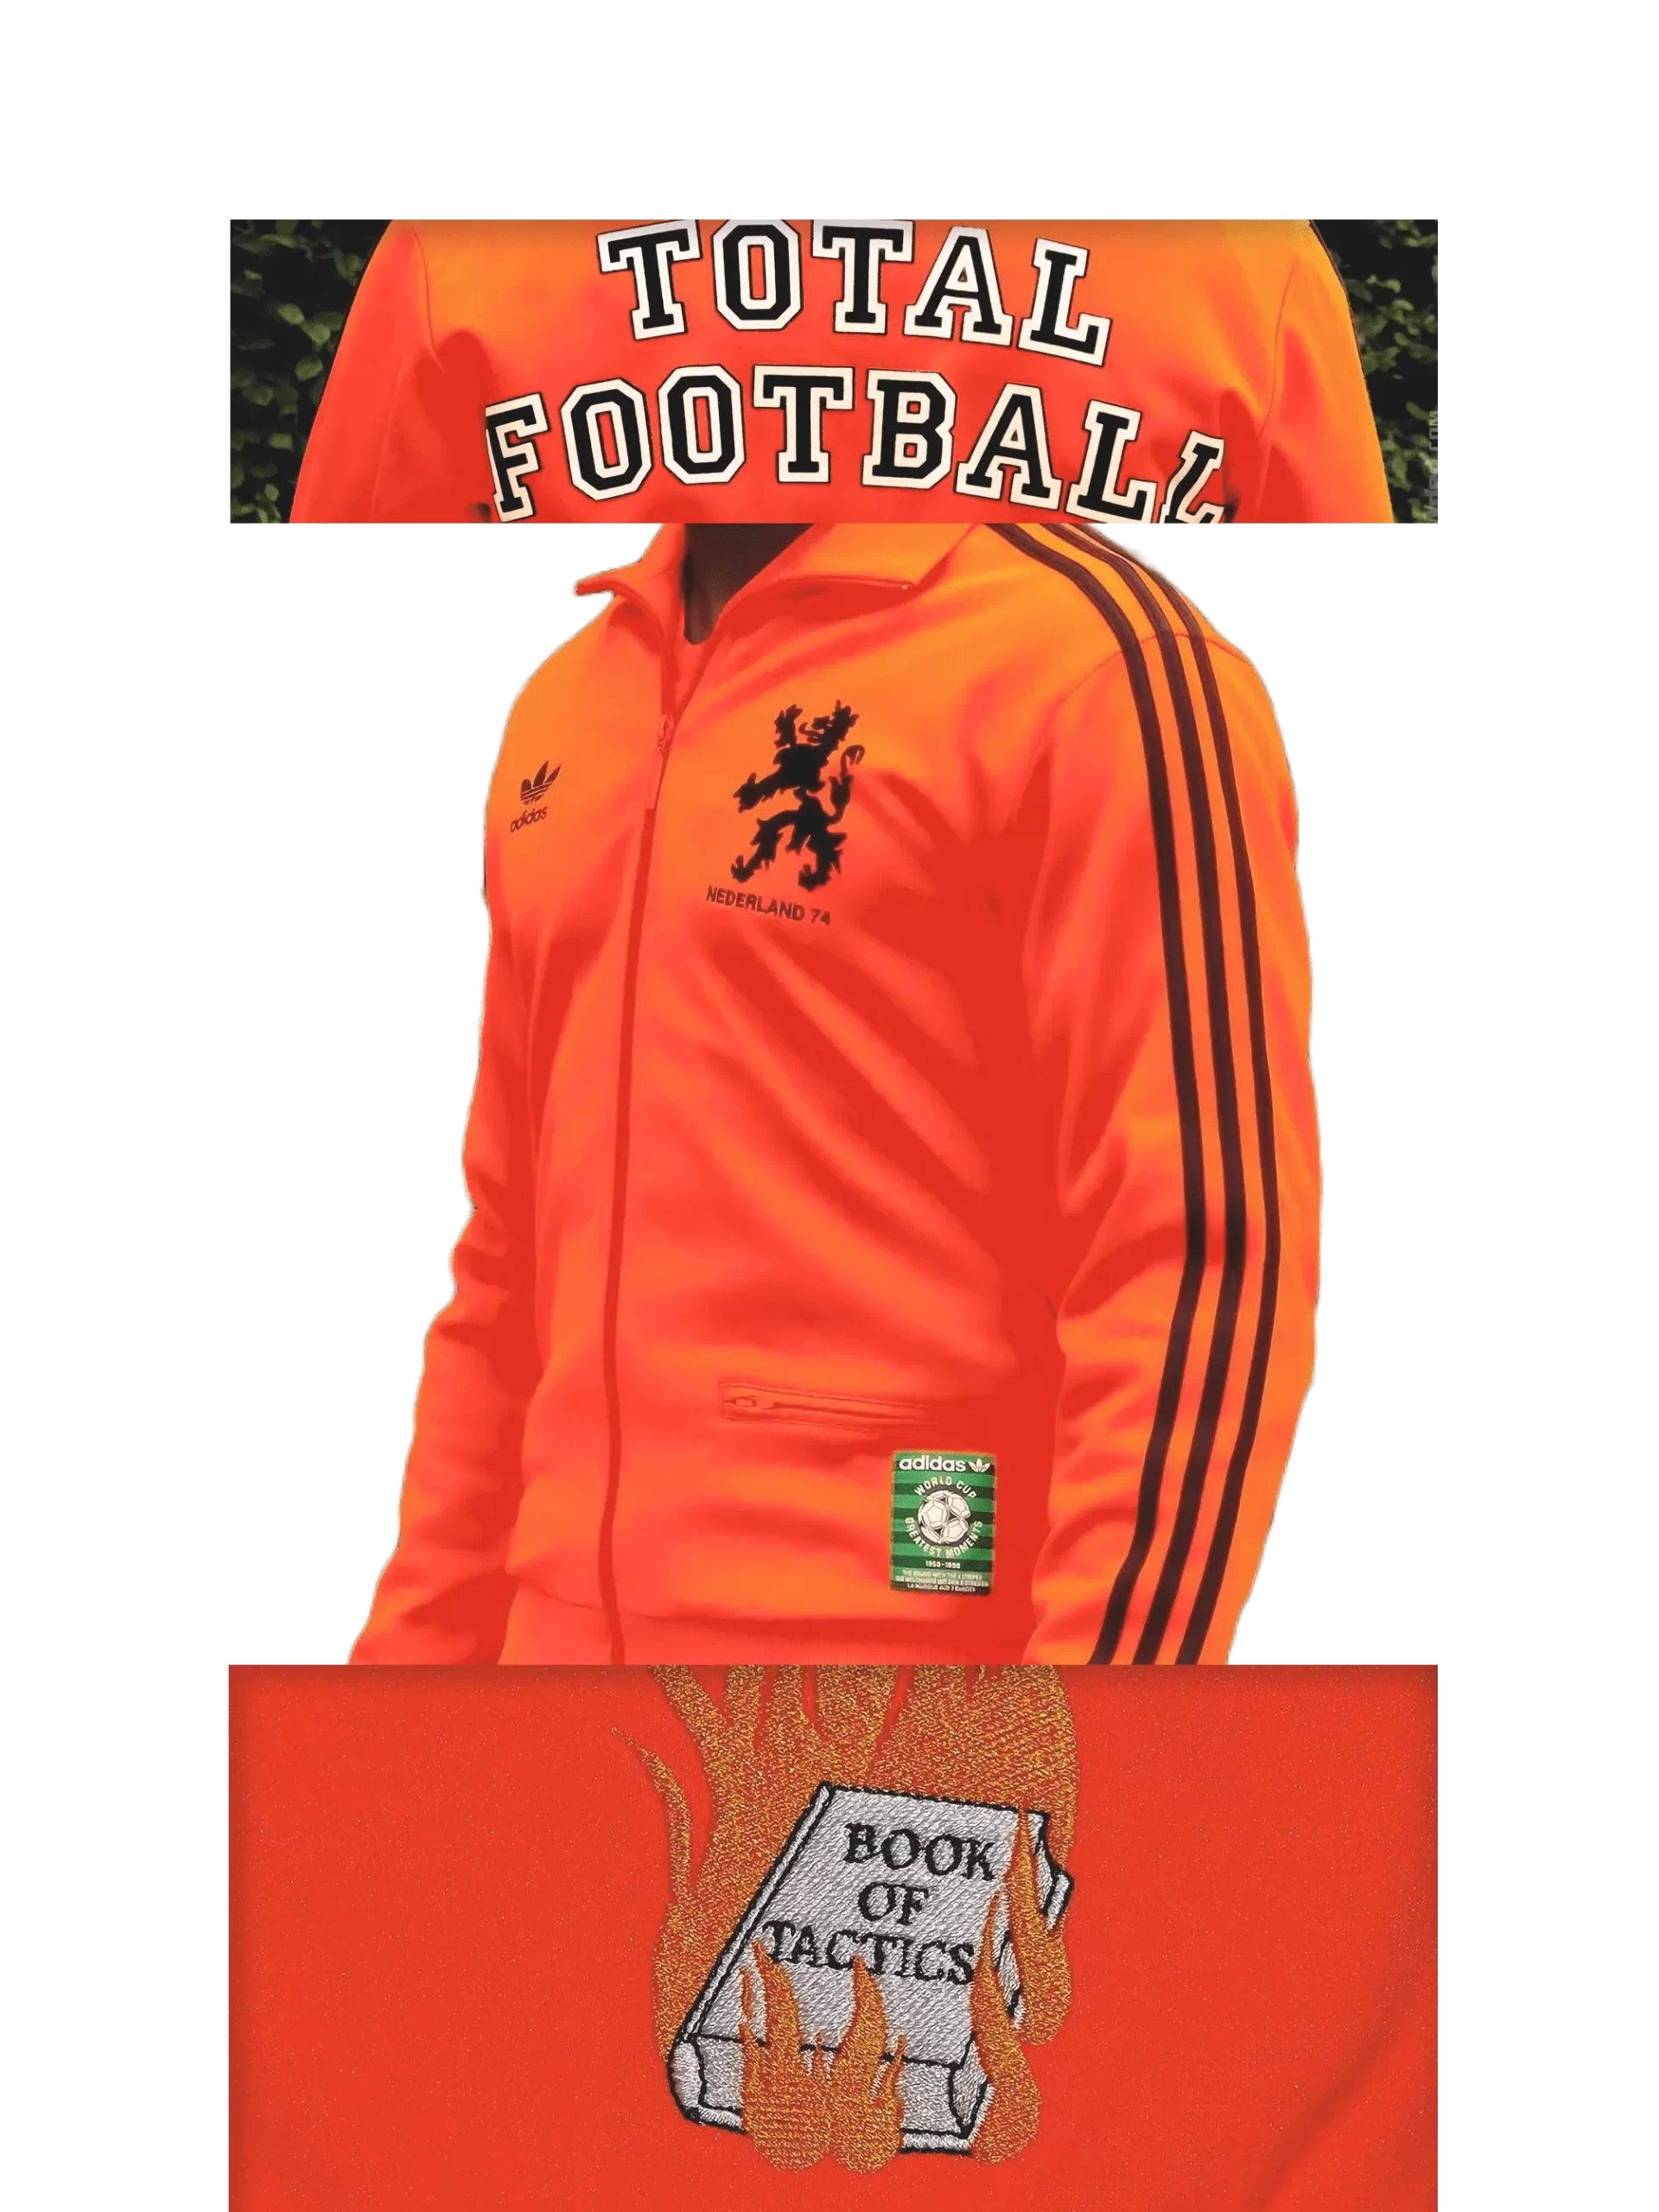 Men's 2005 Netherlands '74 Total Football TT by Adidas: Conscientious (EnLawded.com file #lmchk55778ip2y123337kg9st)